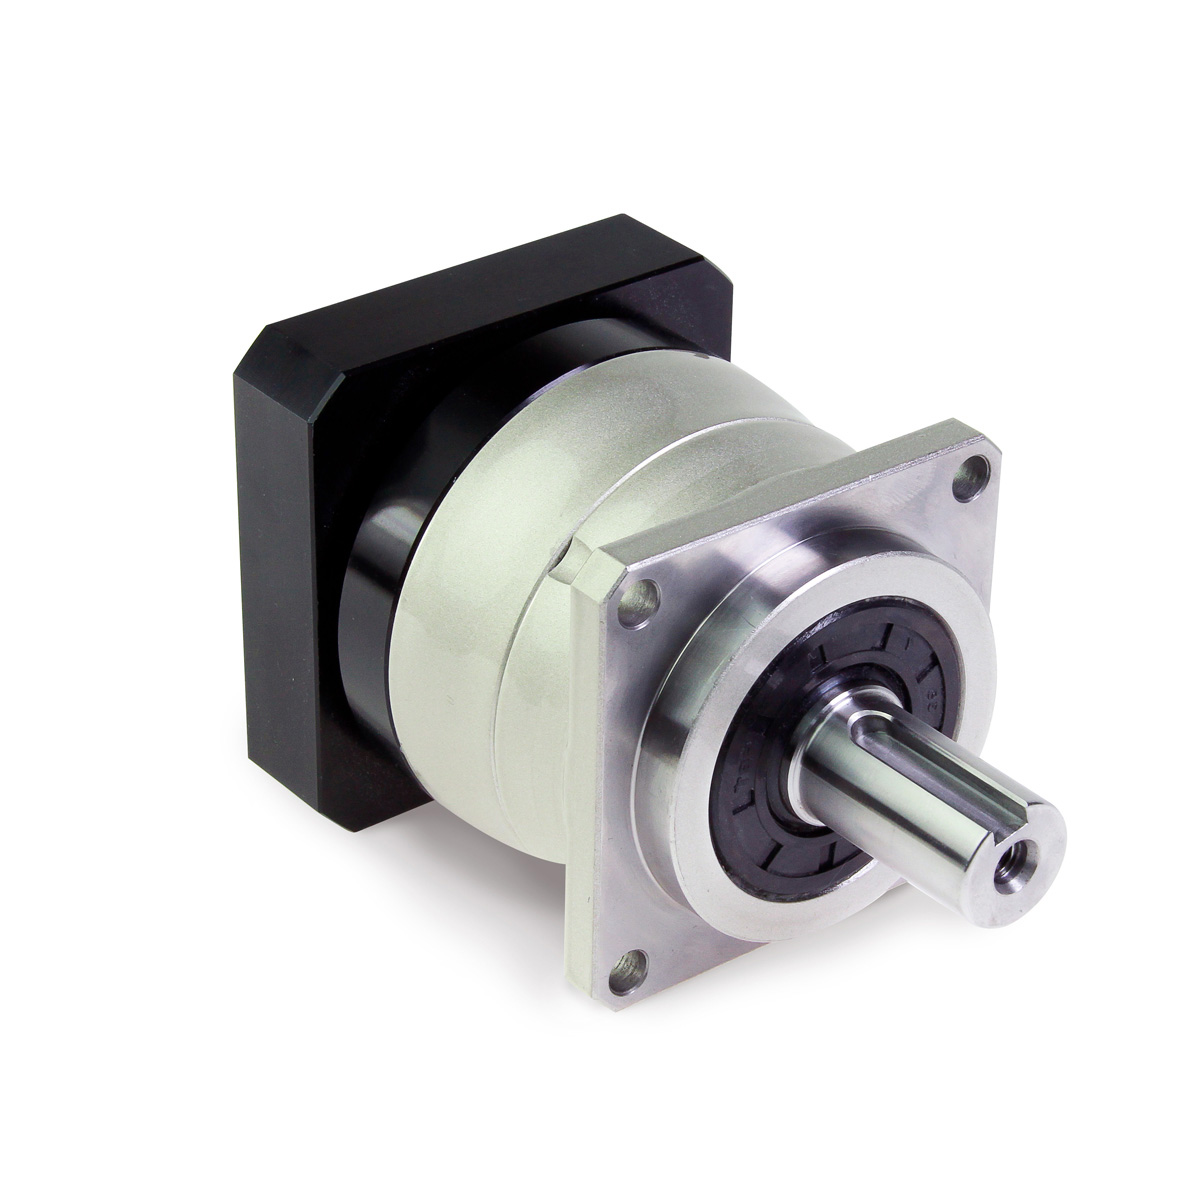 Shaft 1.8° Details about   LIN Engineering 5718M-02 Stepper Motor Step Angle 1/4" Diameter 